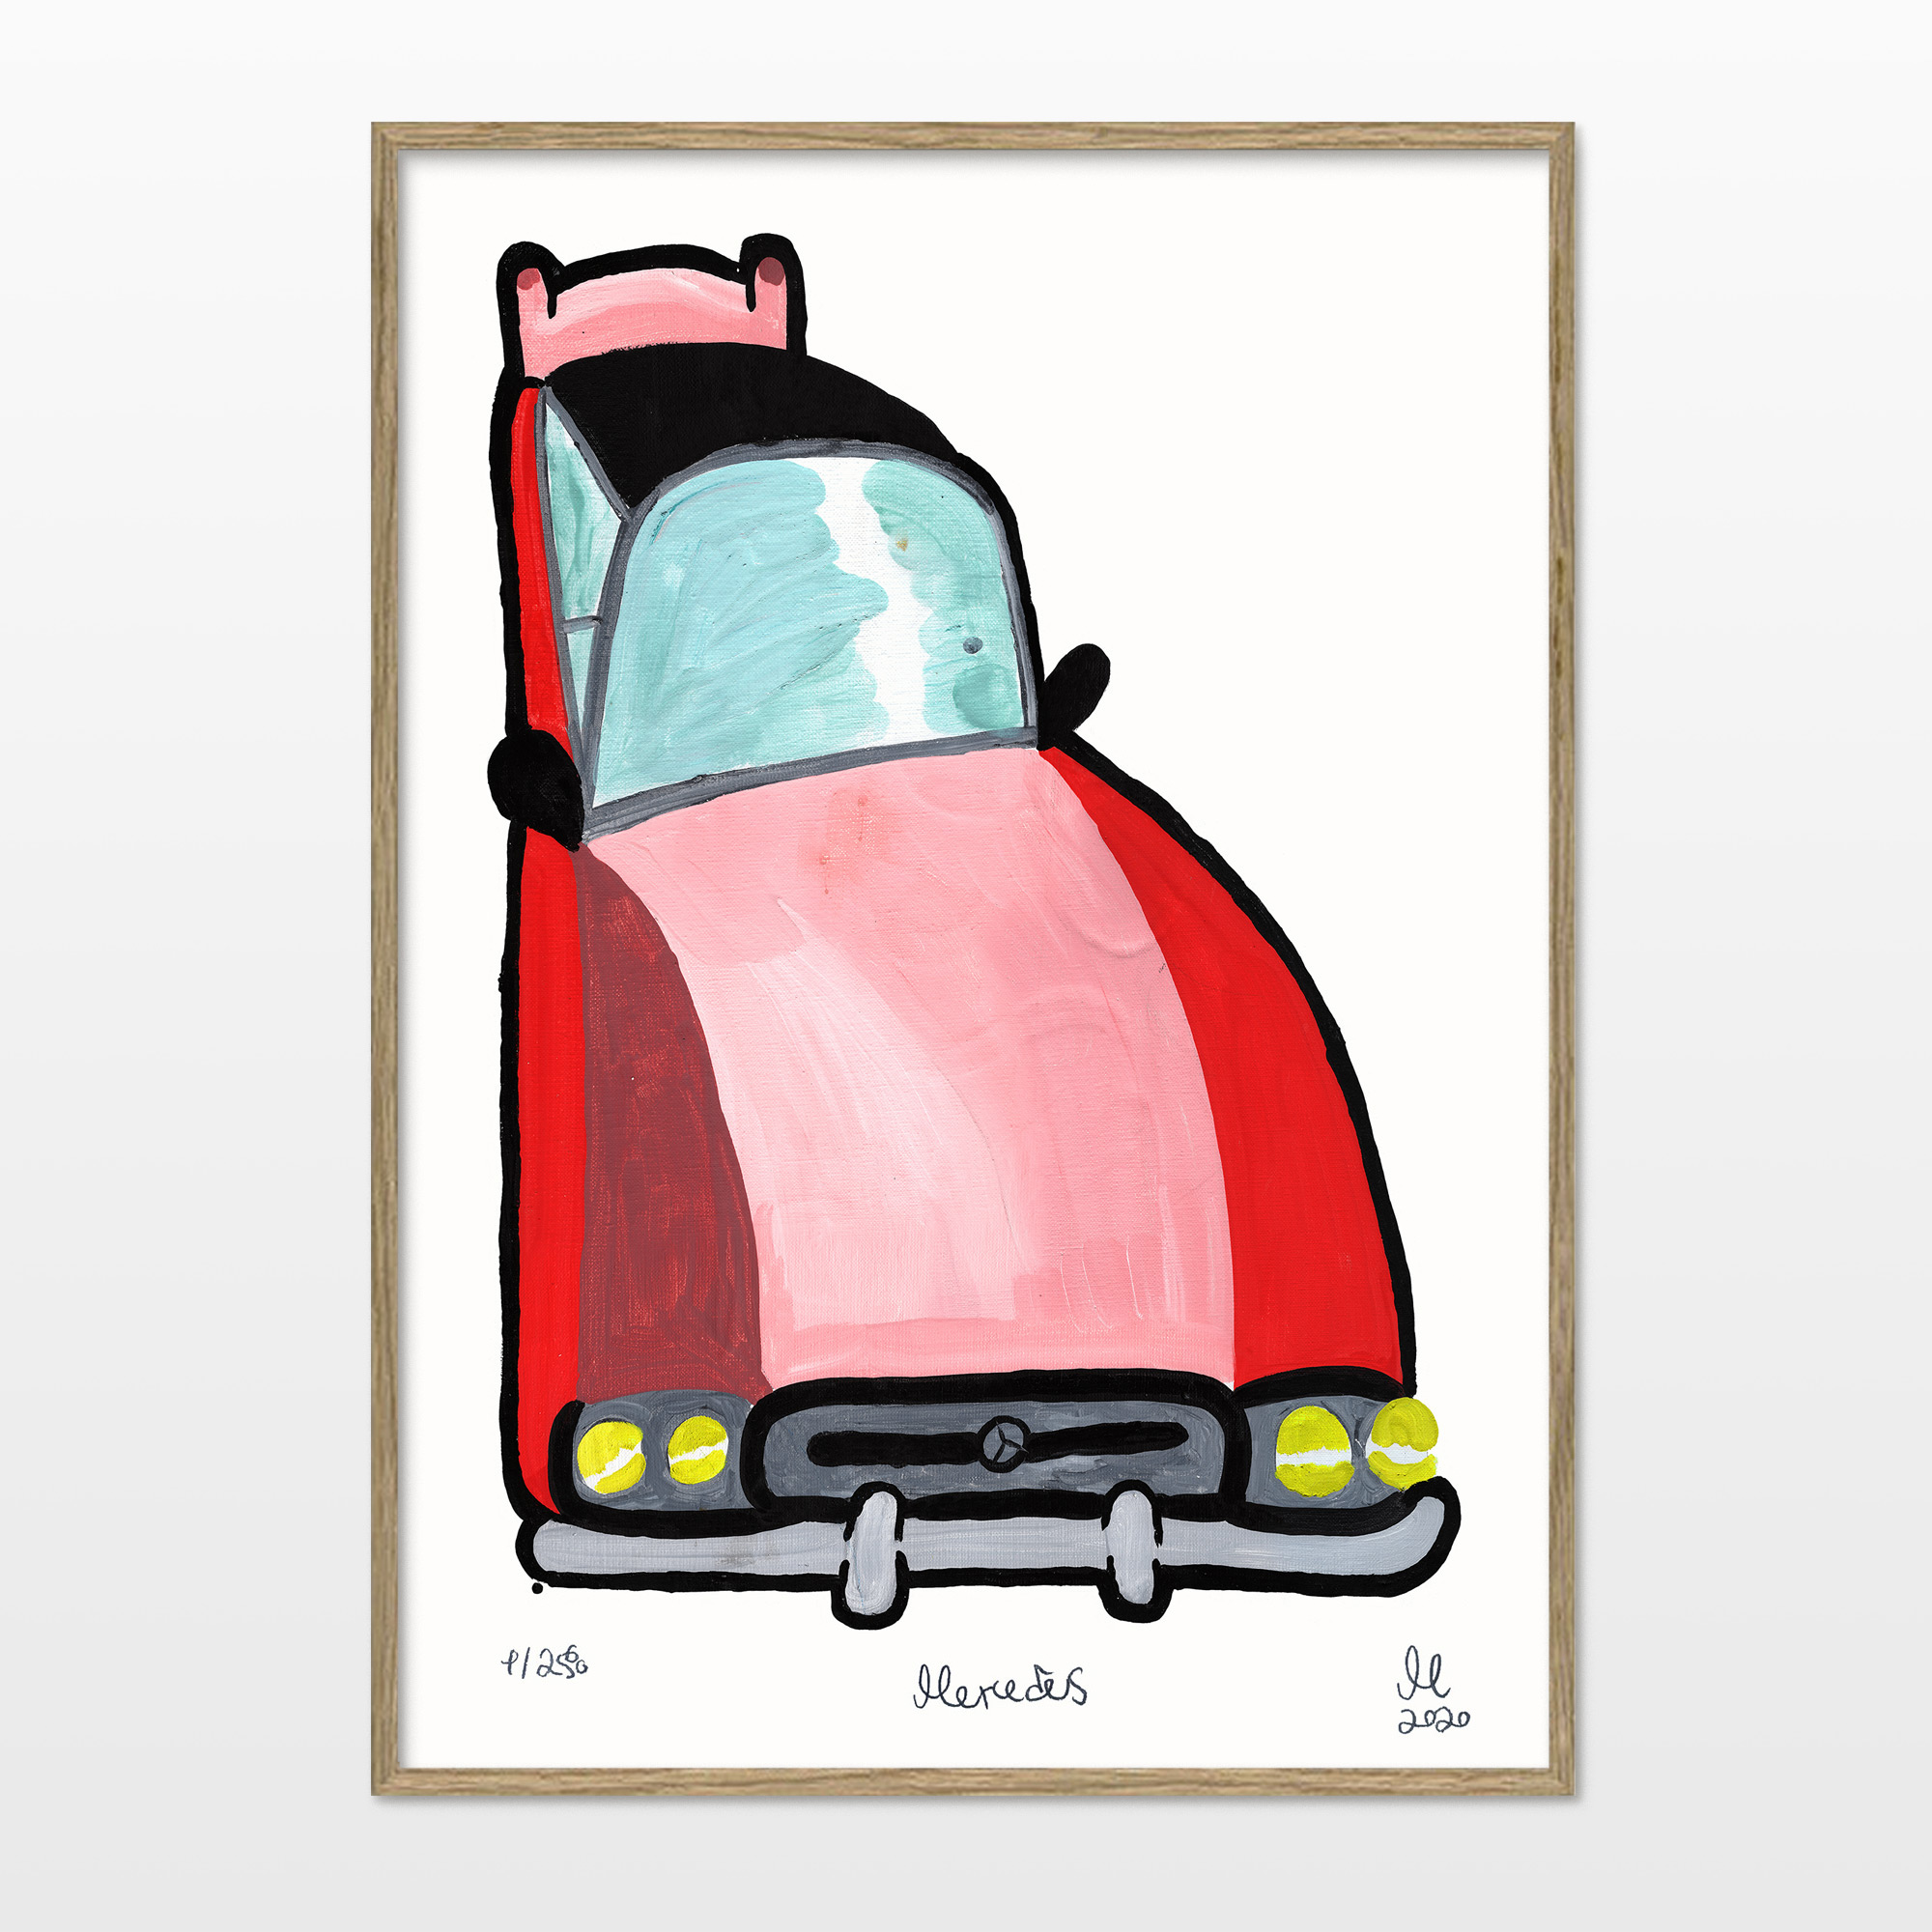 posters-prints, giclee-print, family-friendly, figurative, illustrative, cartoons, movement, technology, transportation, pink, red, turquoise, ink, cars, contemporary-art, danish, decorative, design, interior, interior-design, modern, modern-art, nordic, pop-art, posters, scandinavien, Buy original high quality art. Paintings, drawings, limited edition prints & posters by talented artists.